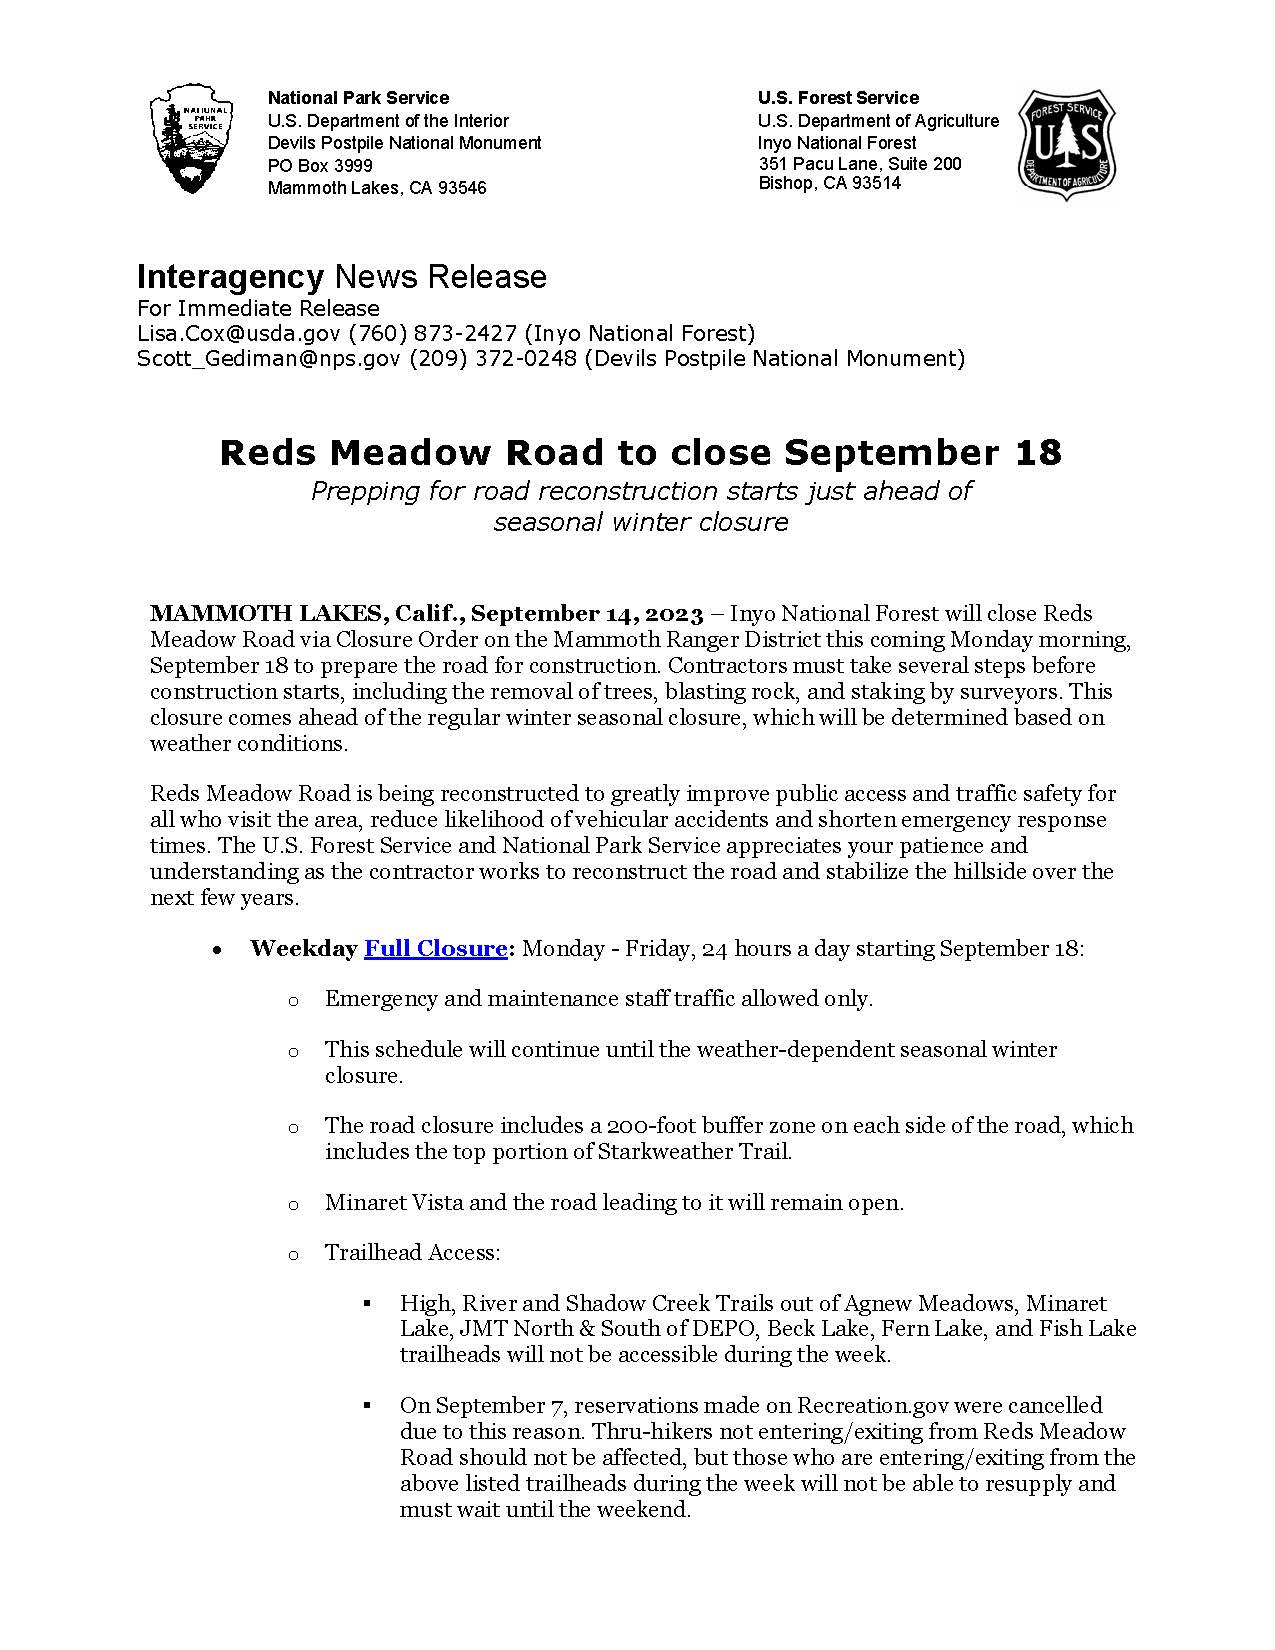 Reds Meadow Road to Close September 18 Interagency News Release